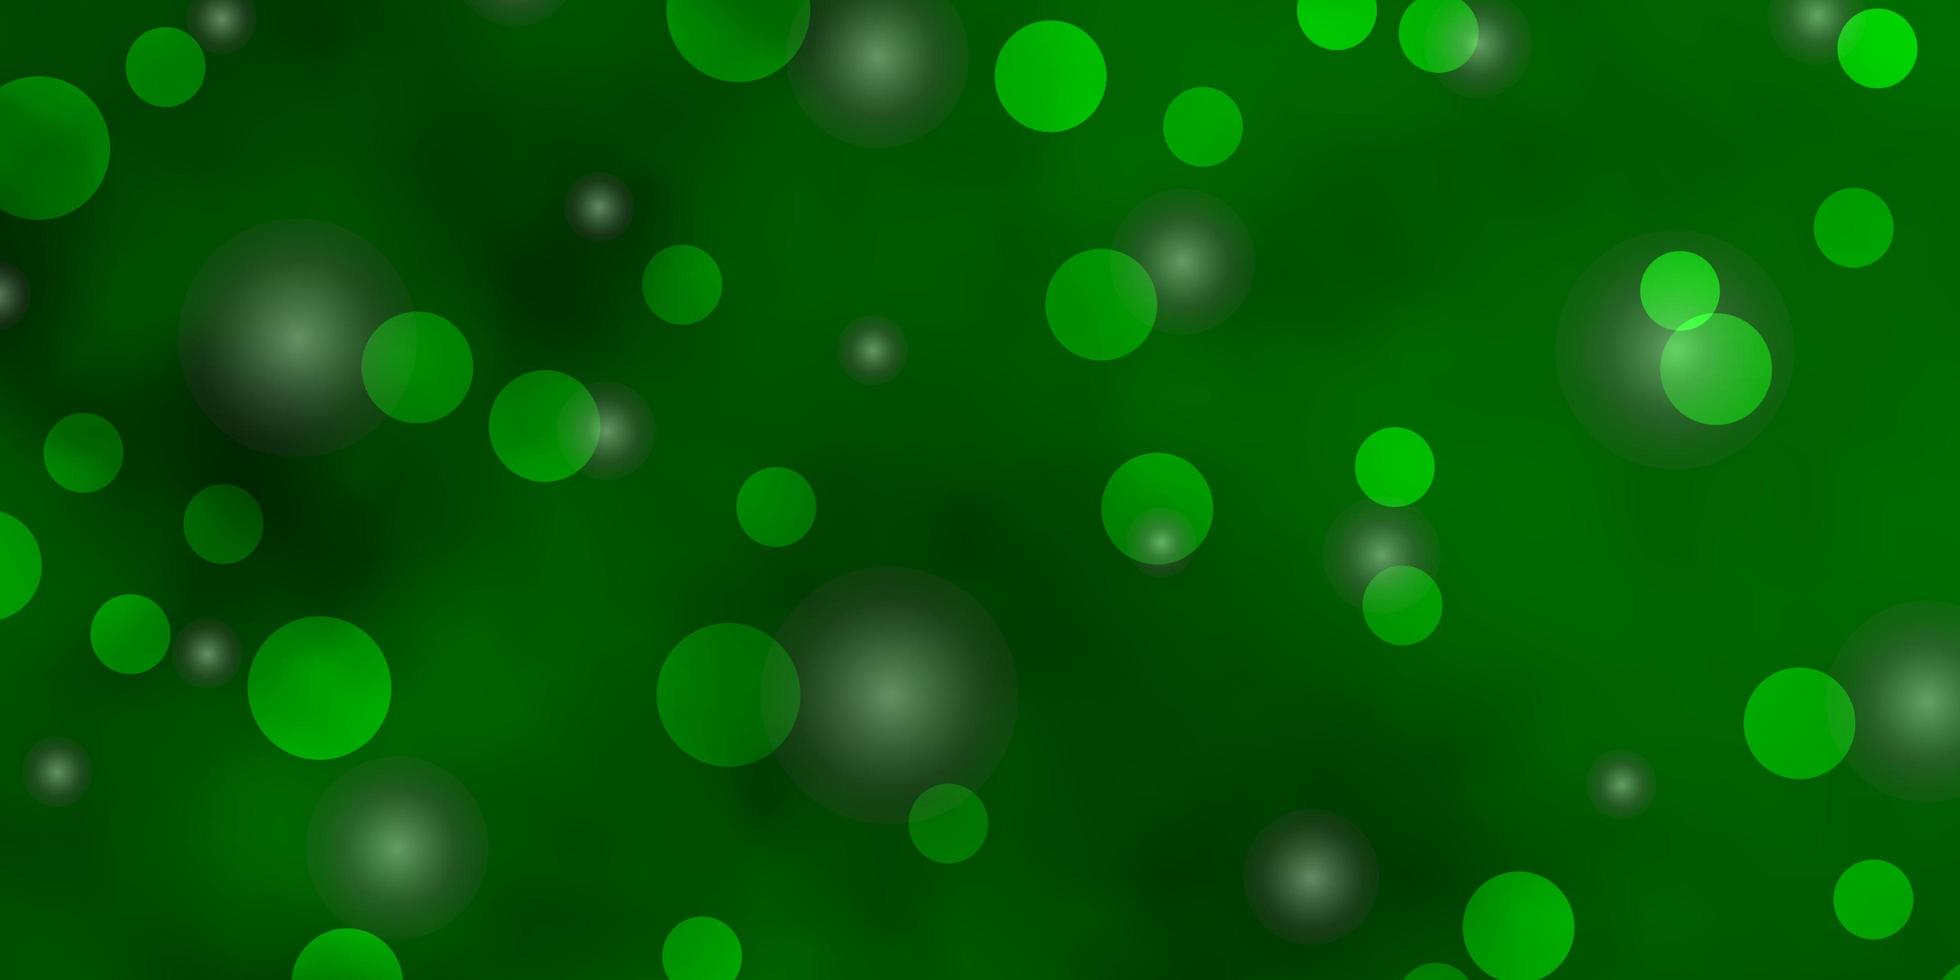 Light Green vector texture with circles, stars. Colorful disks, stars on simple gradient background. Design for posters, banners.